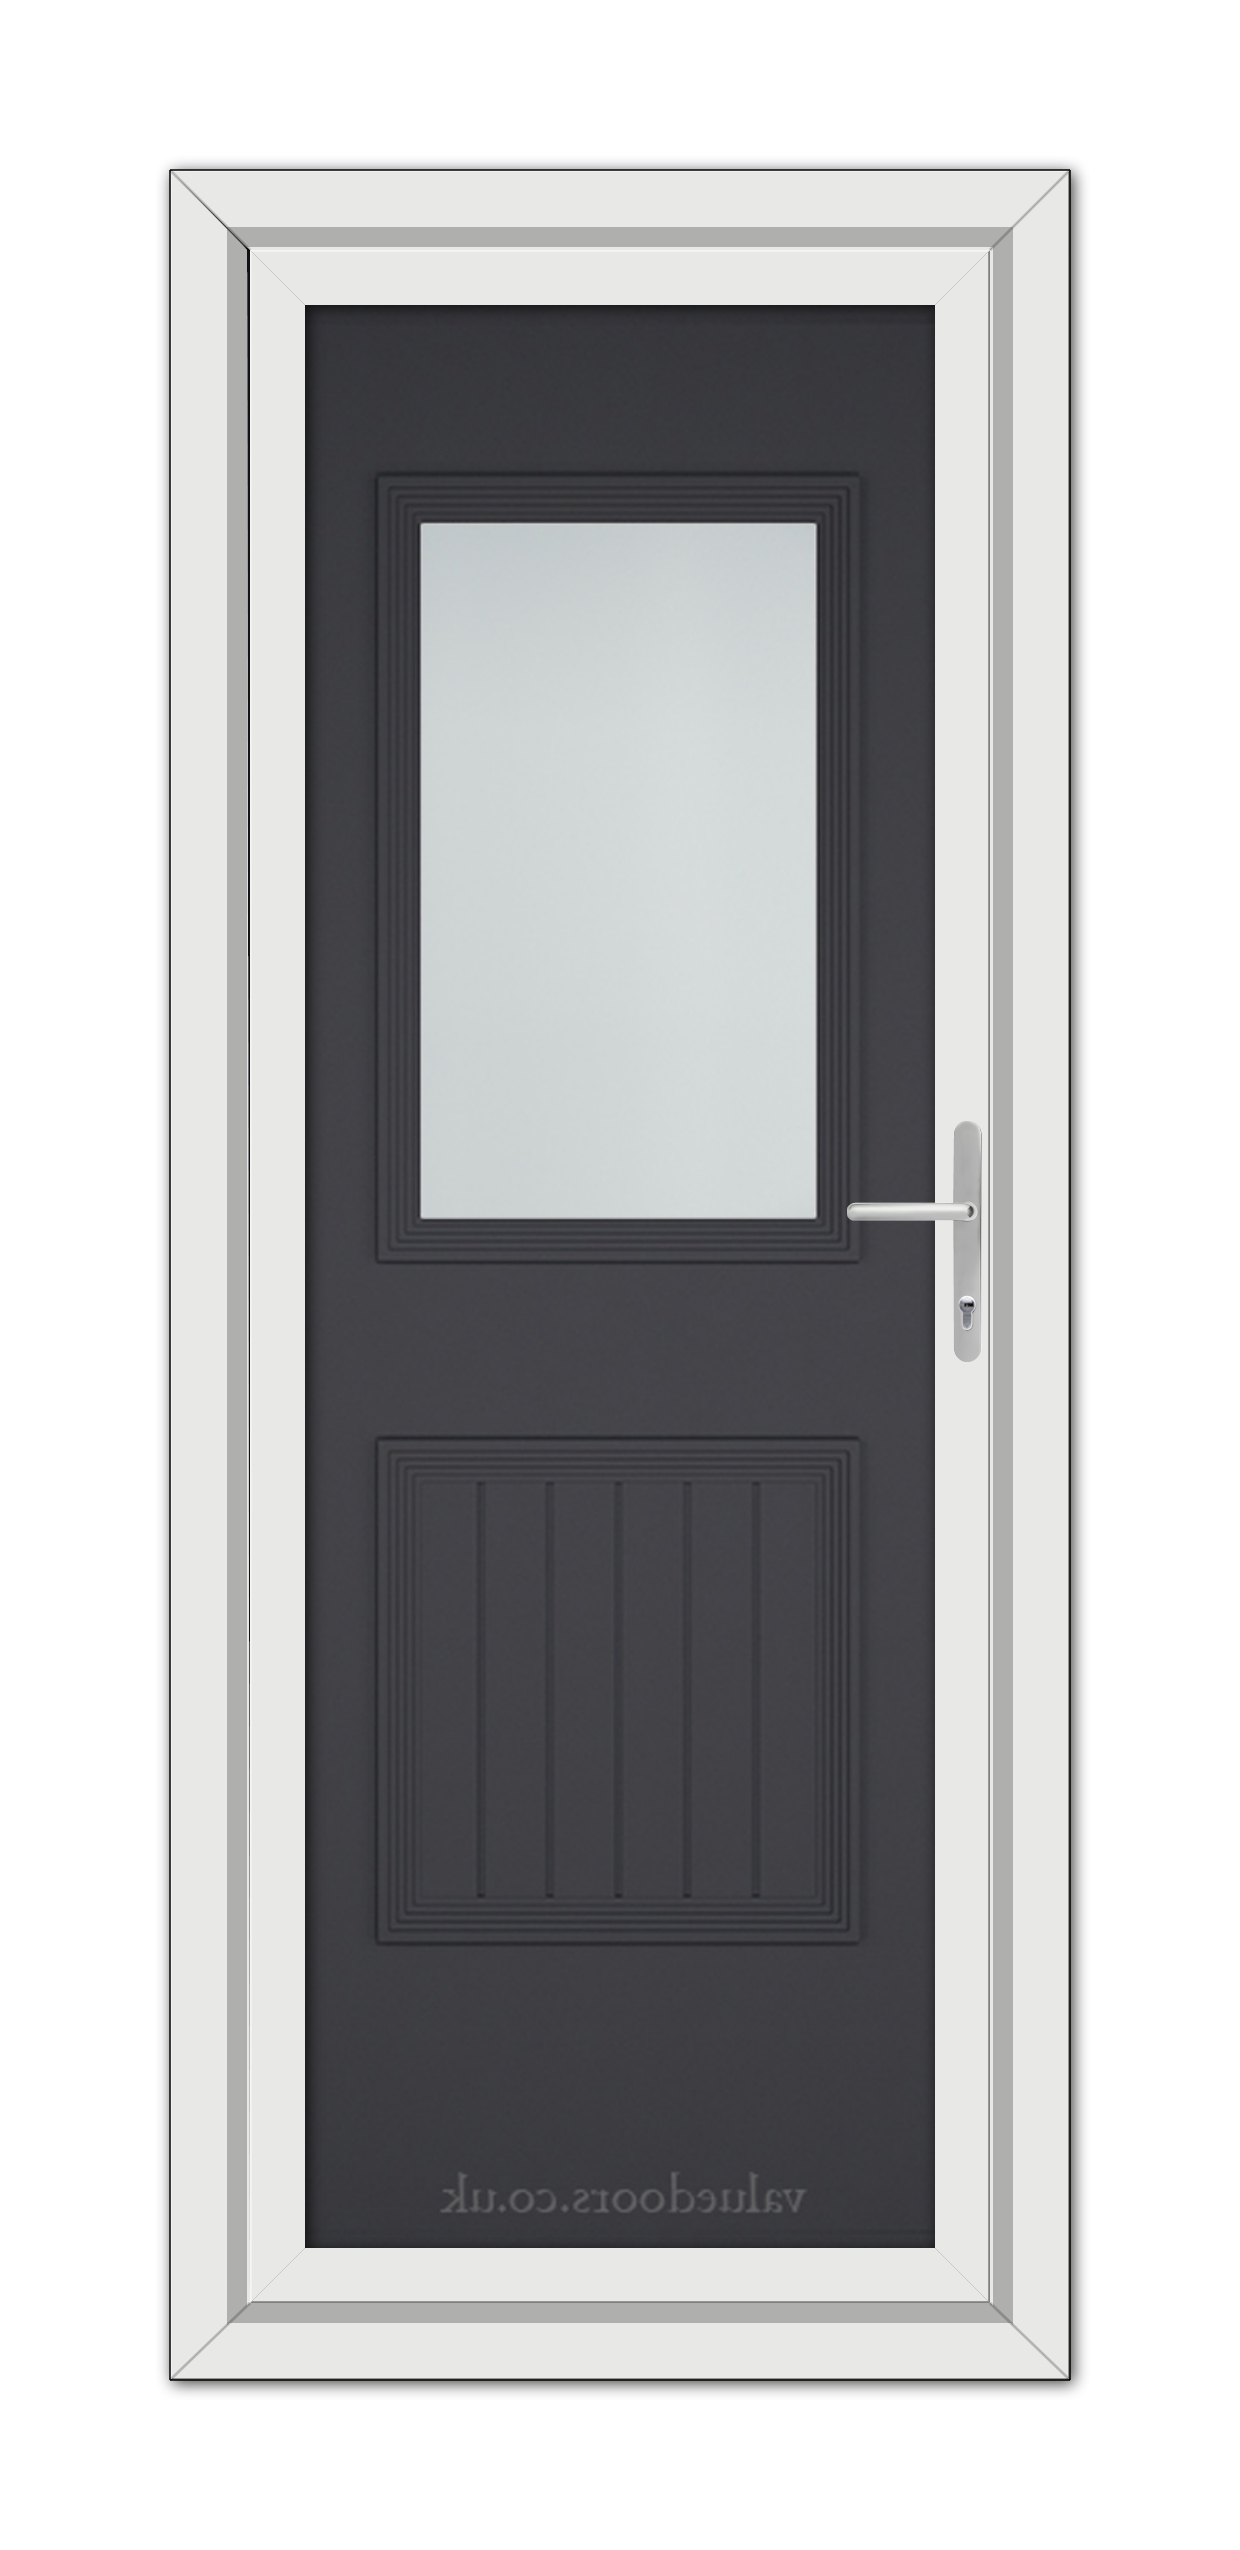 Modern Grey Alnwick One uPVC Door with a vertical rectangular window and a silver handle, set within a white frame.